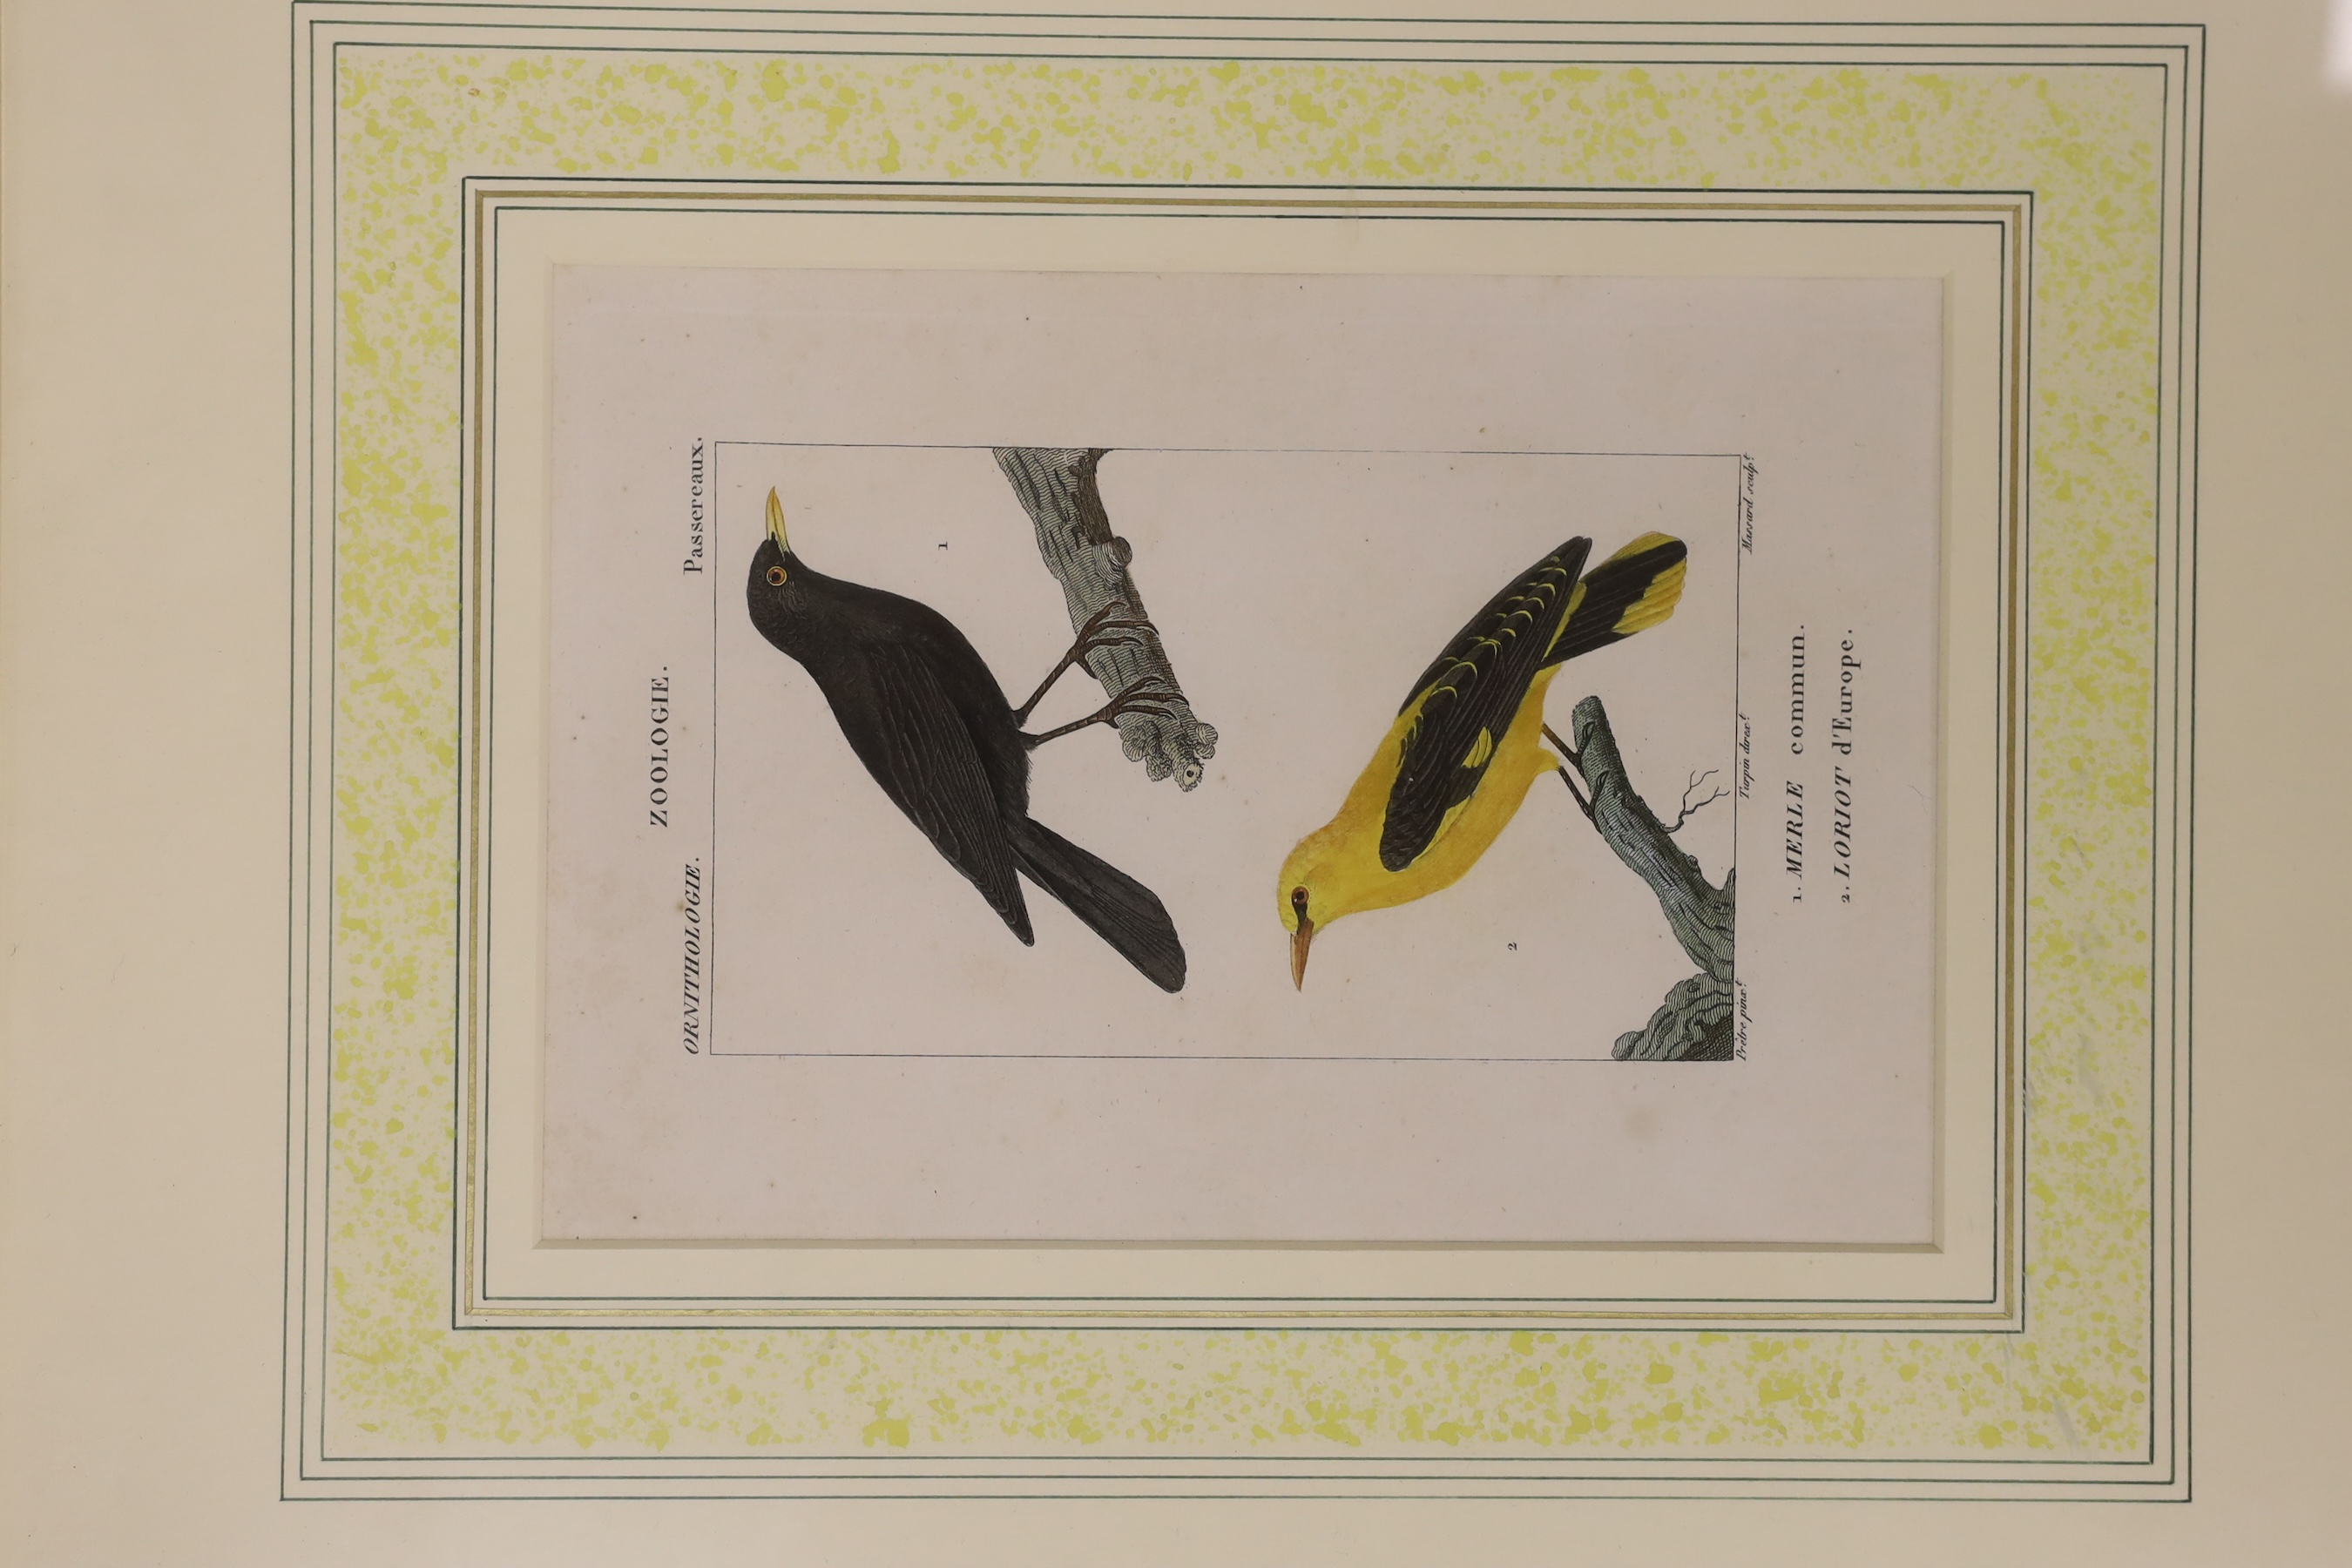 Two 19th century hand coloured ornithological engravings from Turpins ‘Dictionnaire des Sciences Naturelles’, publ. 1816-1830 Paris, F G Levrault, label verso, each overall 20 x 13.5cm, framed as one